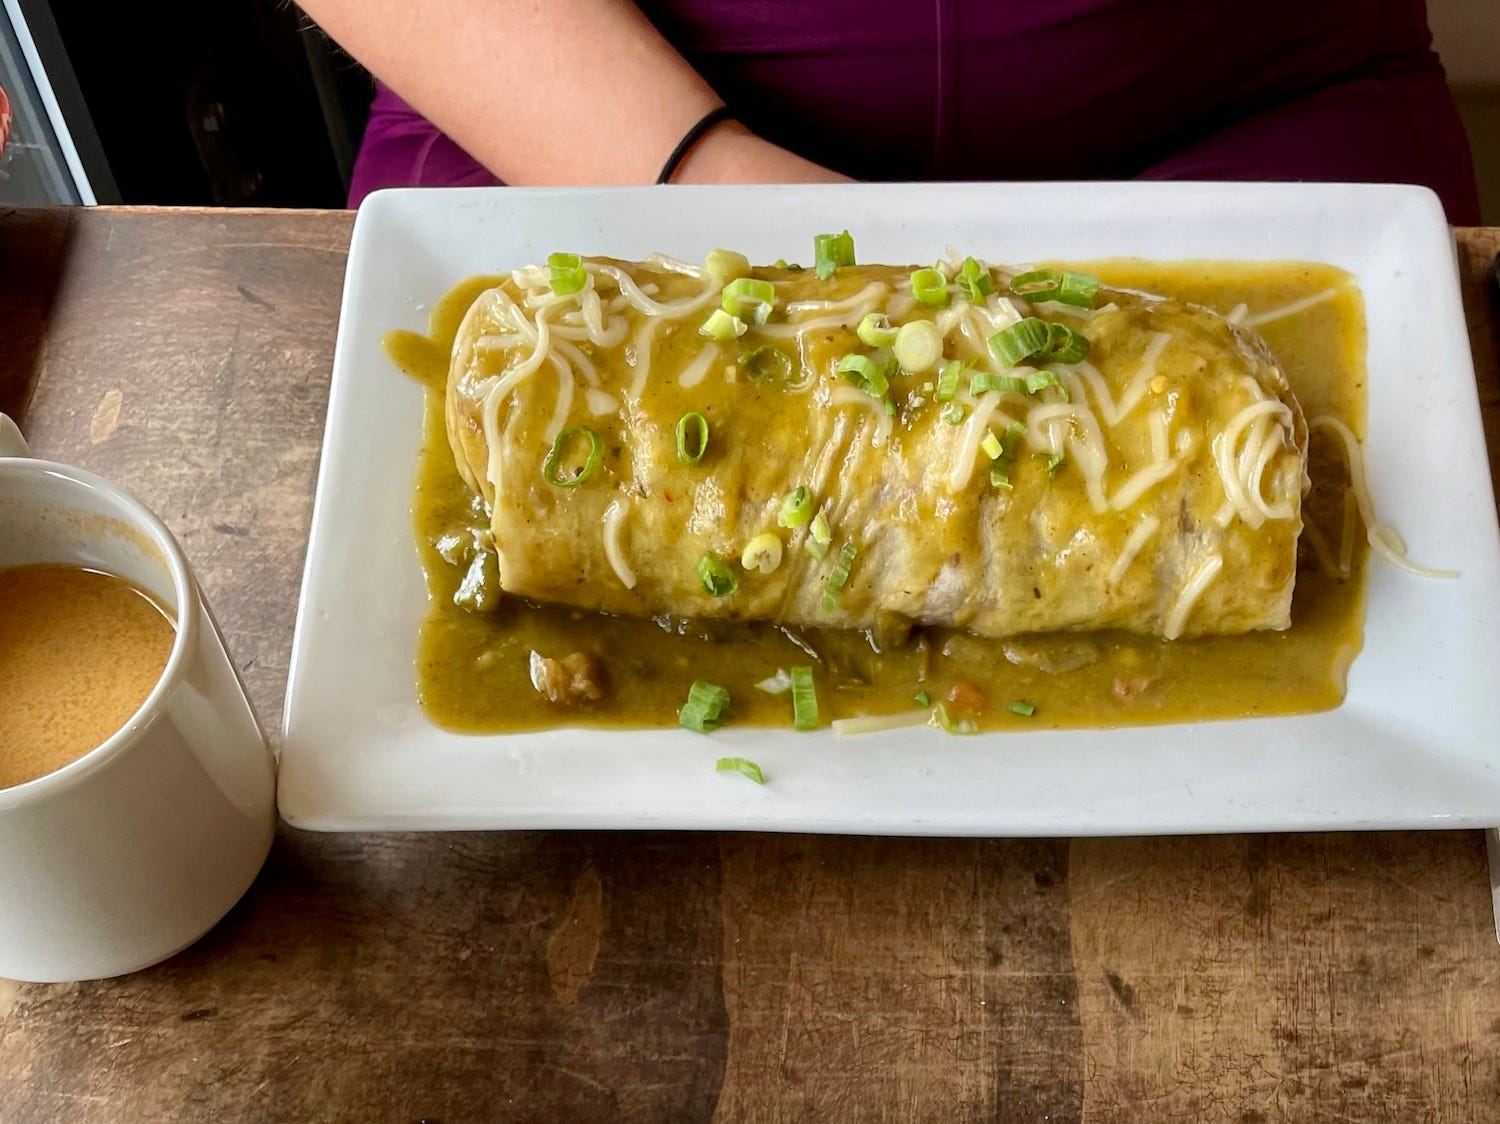 The breakfast burrito smothered in green chile at Onefold.